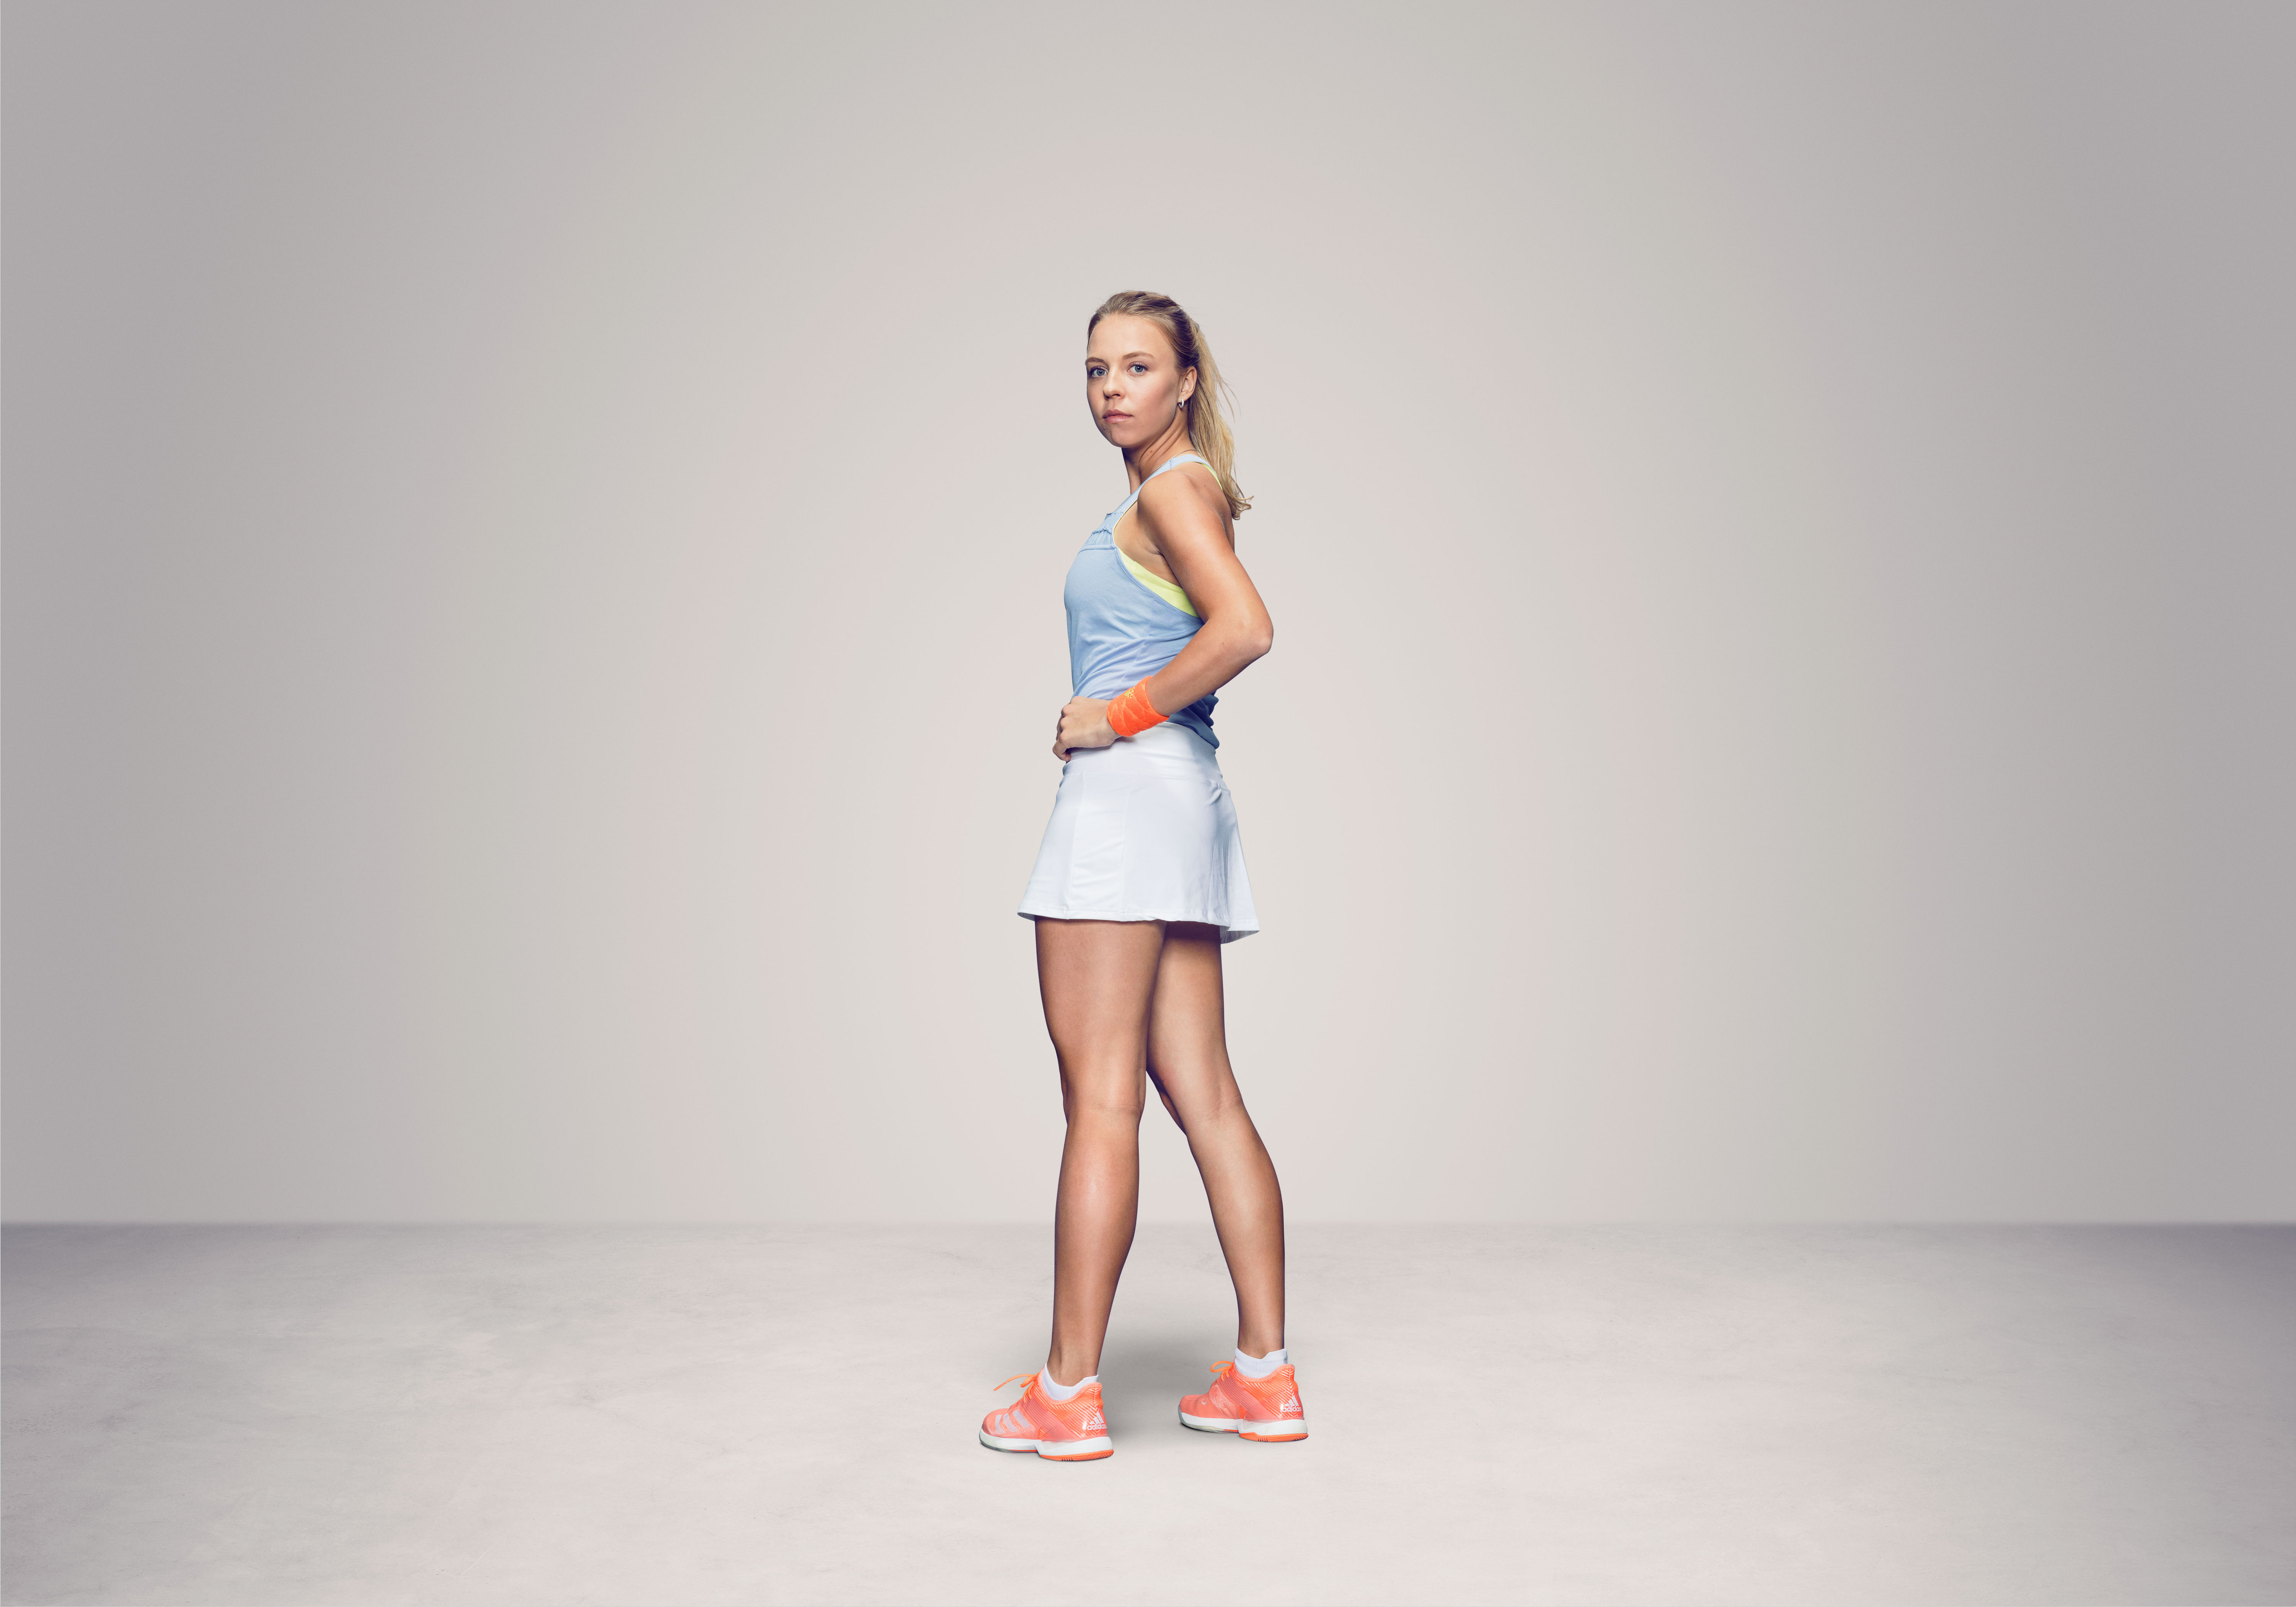  Anett Kontaveit HD Android Wallpapers